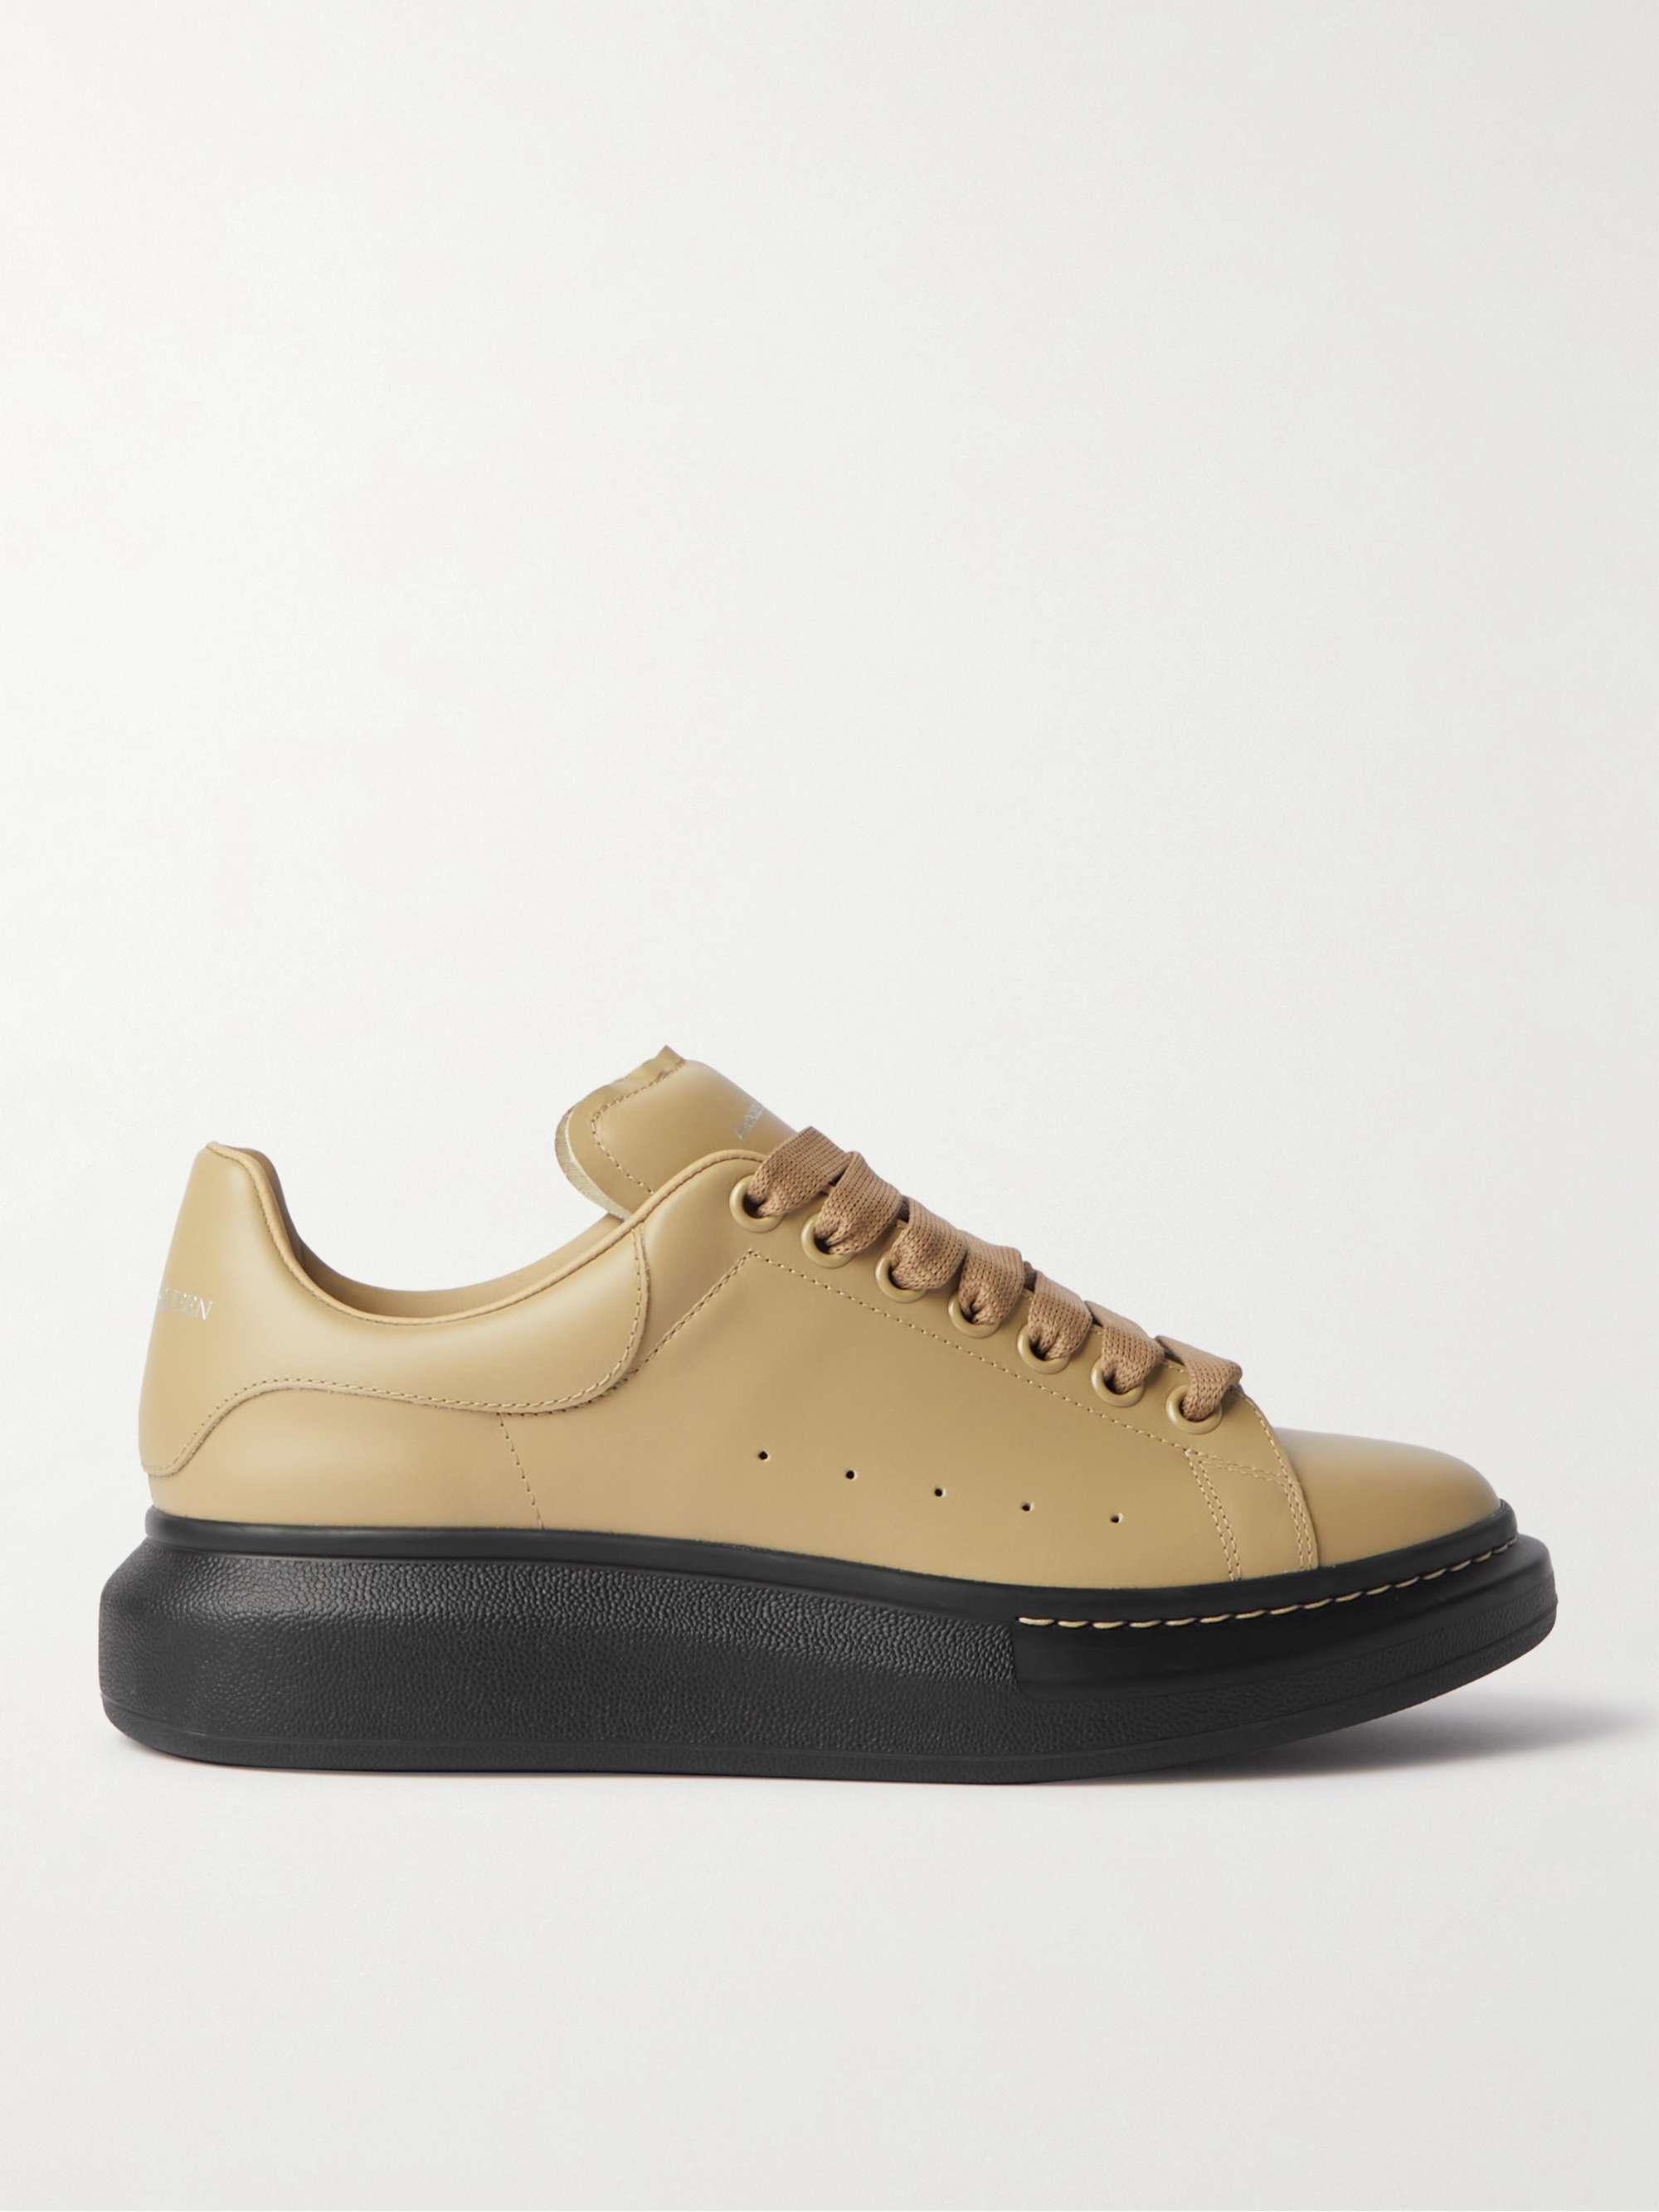 ALEXANDER MCQUEEN Exaggerated-Sole Leather Sneakers | MR PORTER